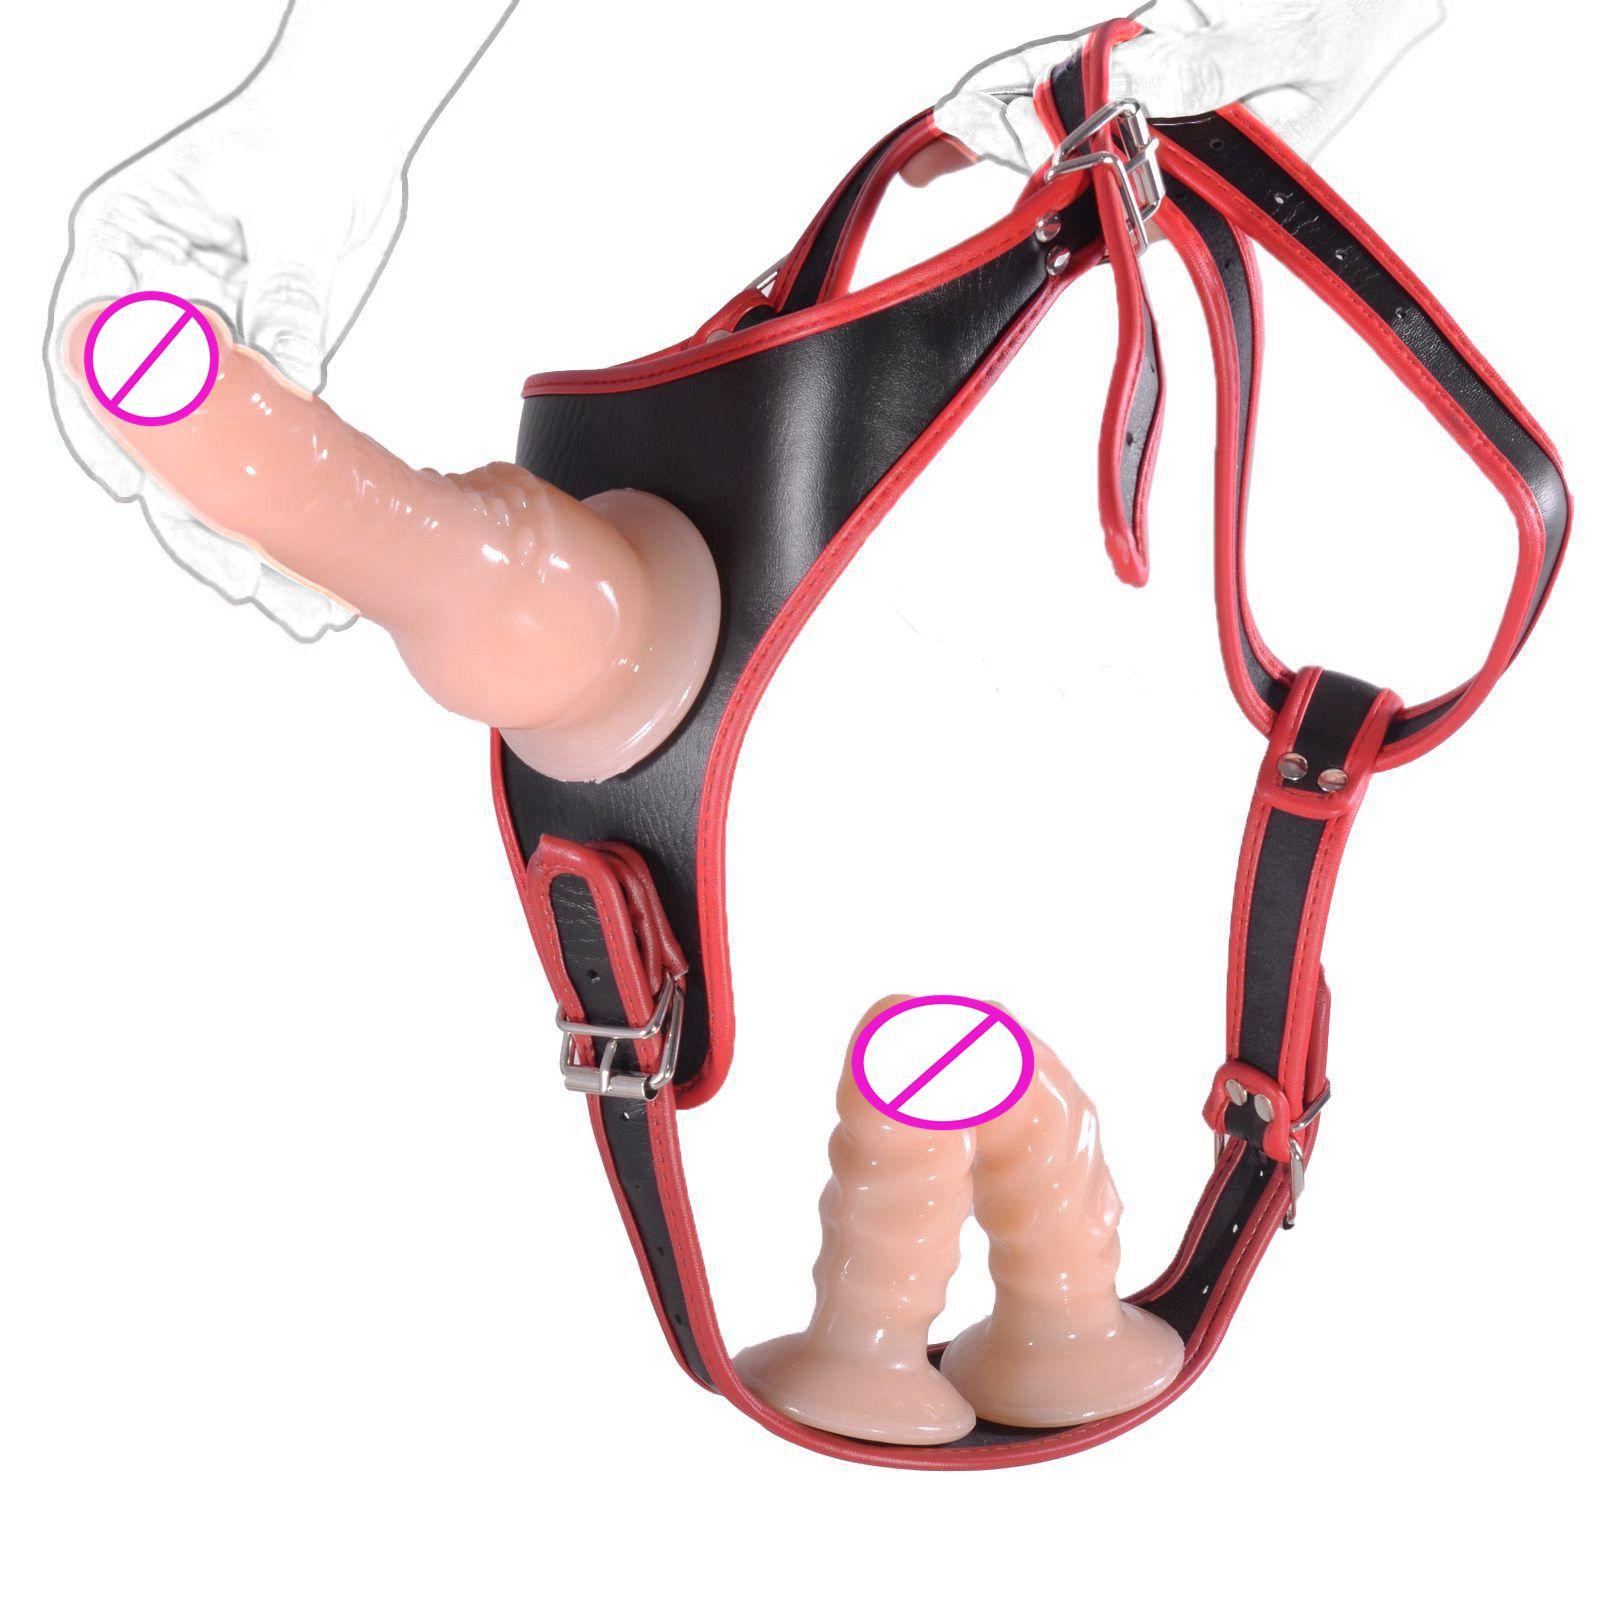 Bundled 3 Heads Strap On Dildo Wearable Harness Panty Removeable Lesbian Dildo Vagina +anal Sm Sex Toys For Women Couple